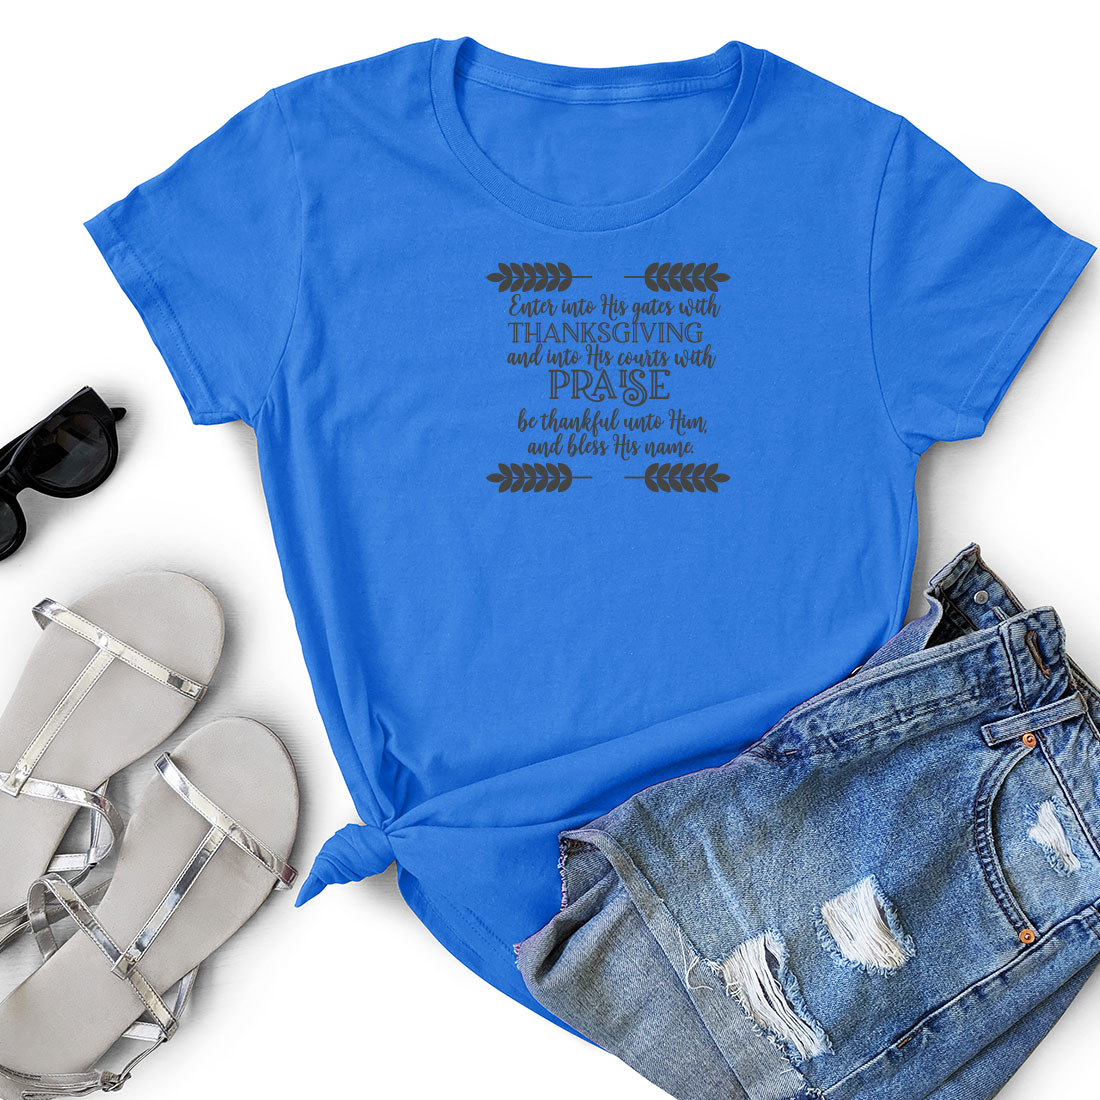 Blue t - shirt with a quote on it.